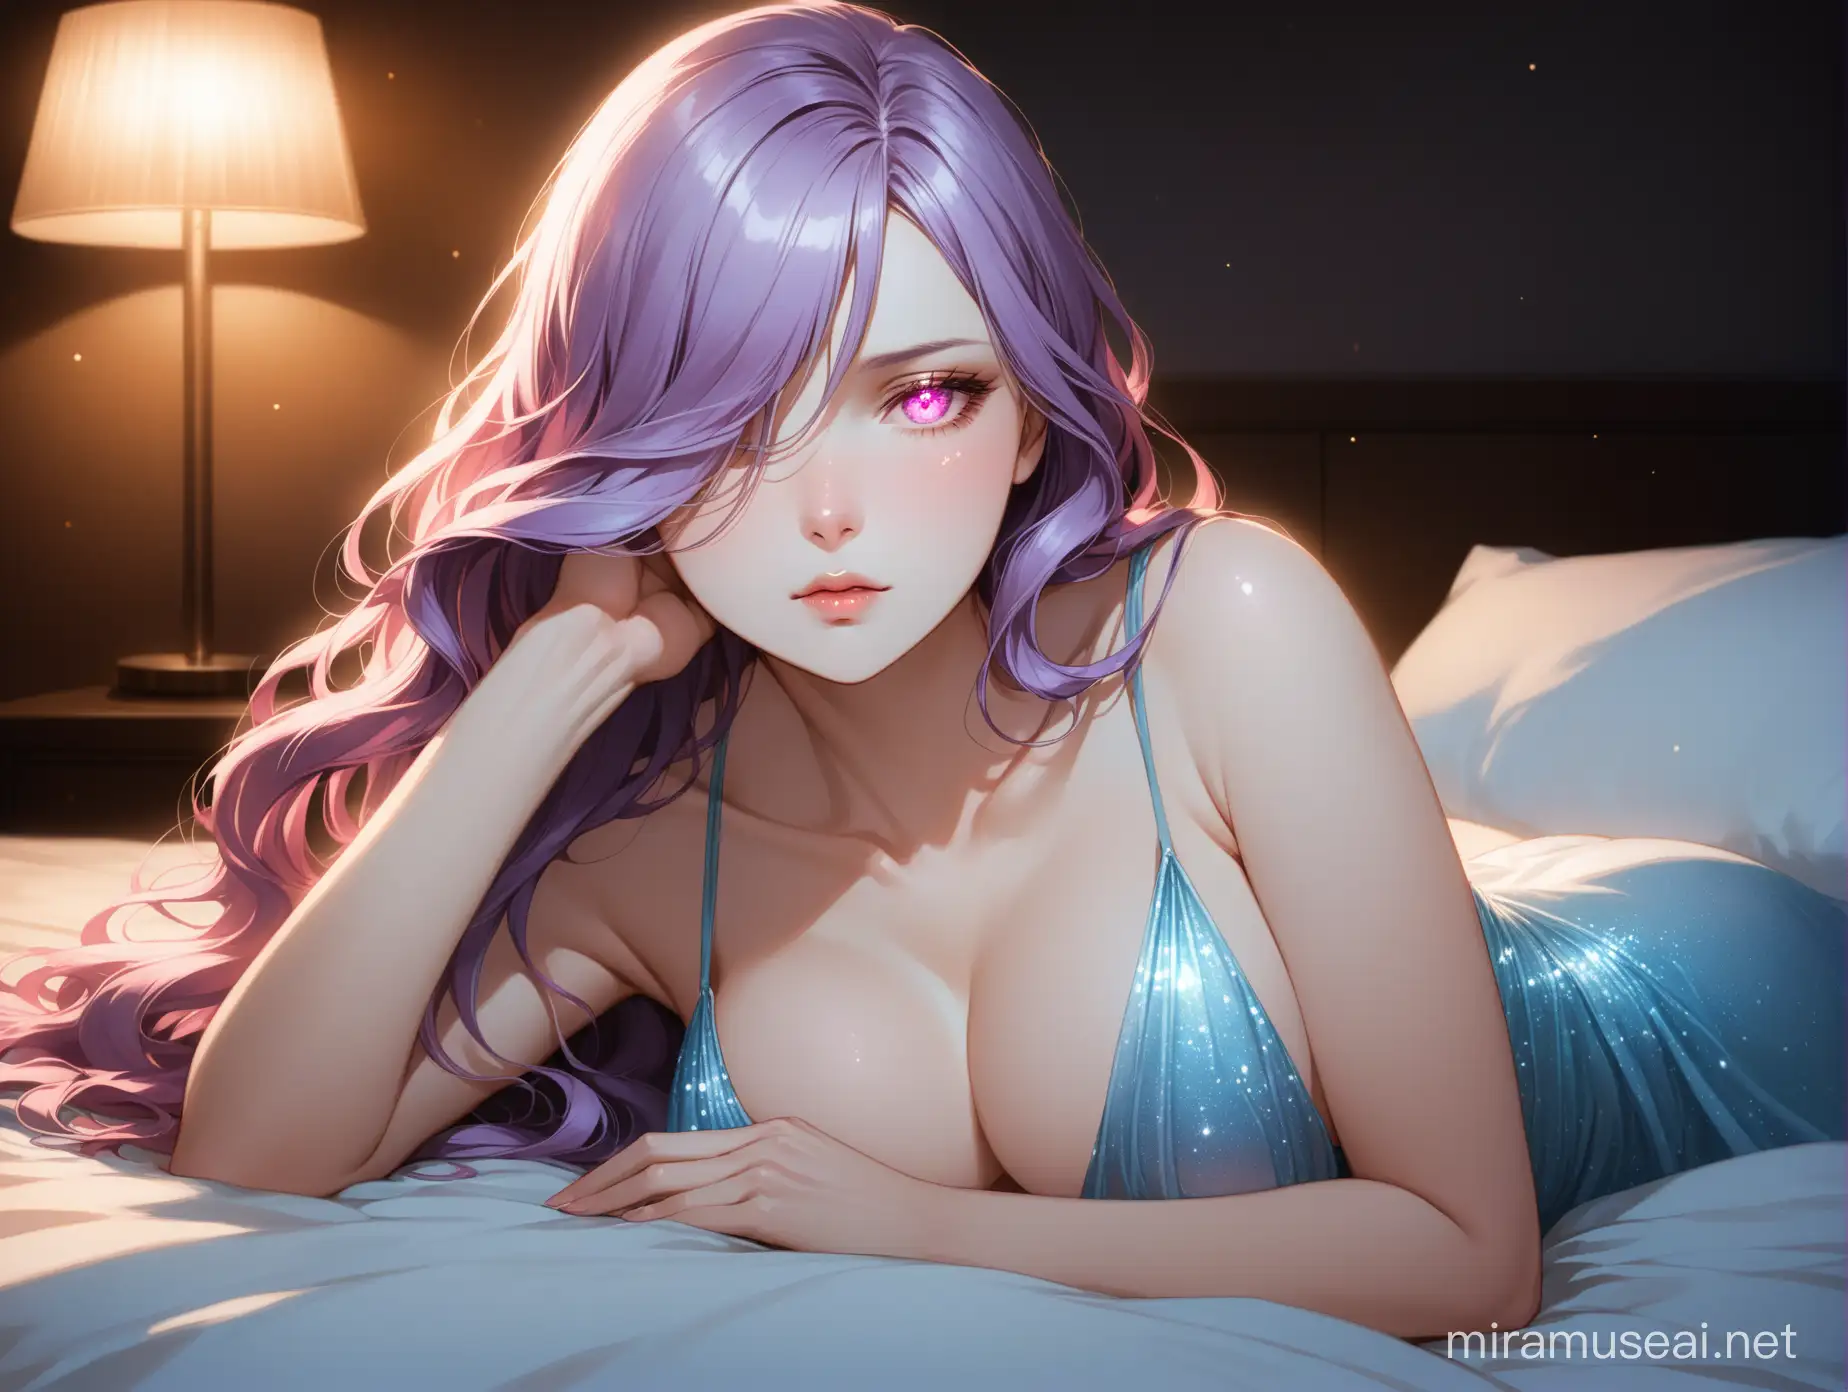 A mature woman; with long wavy violet hair that partially covers her left eye, pale complexion, sleepy reddish-pink eyes with a pale blue eyeshadow around her eyes; wears a loose see-trough slip sparkling dress exposes her chest; lying in bed, indoors, in a dimly lighten dark hotel room; in a nonchalant pose, gazing seductively at the viewer; 